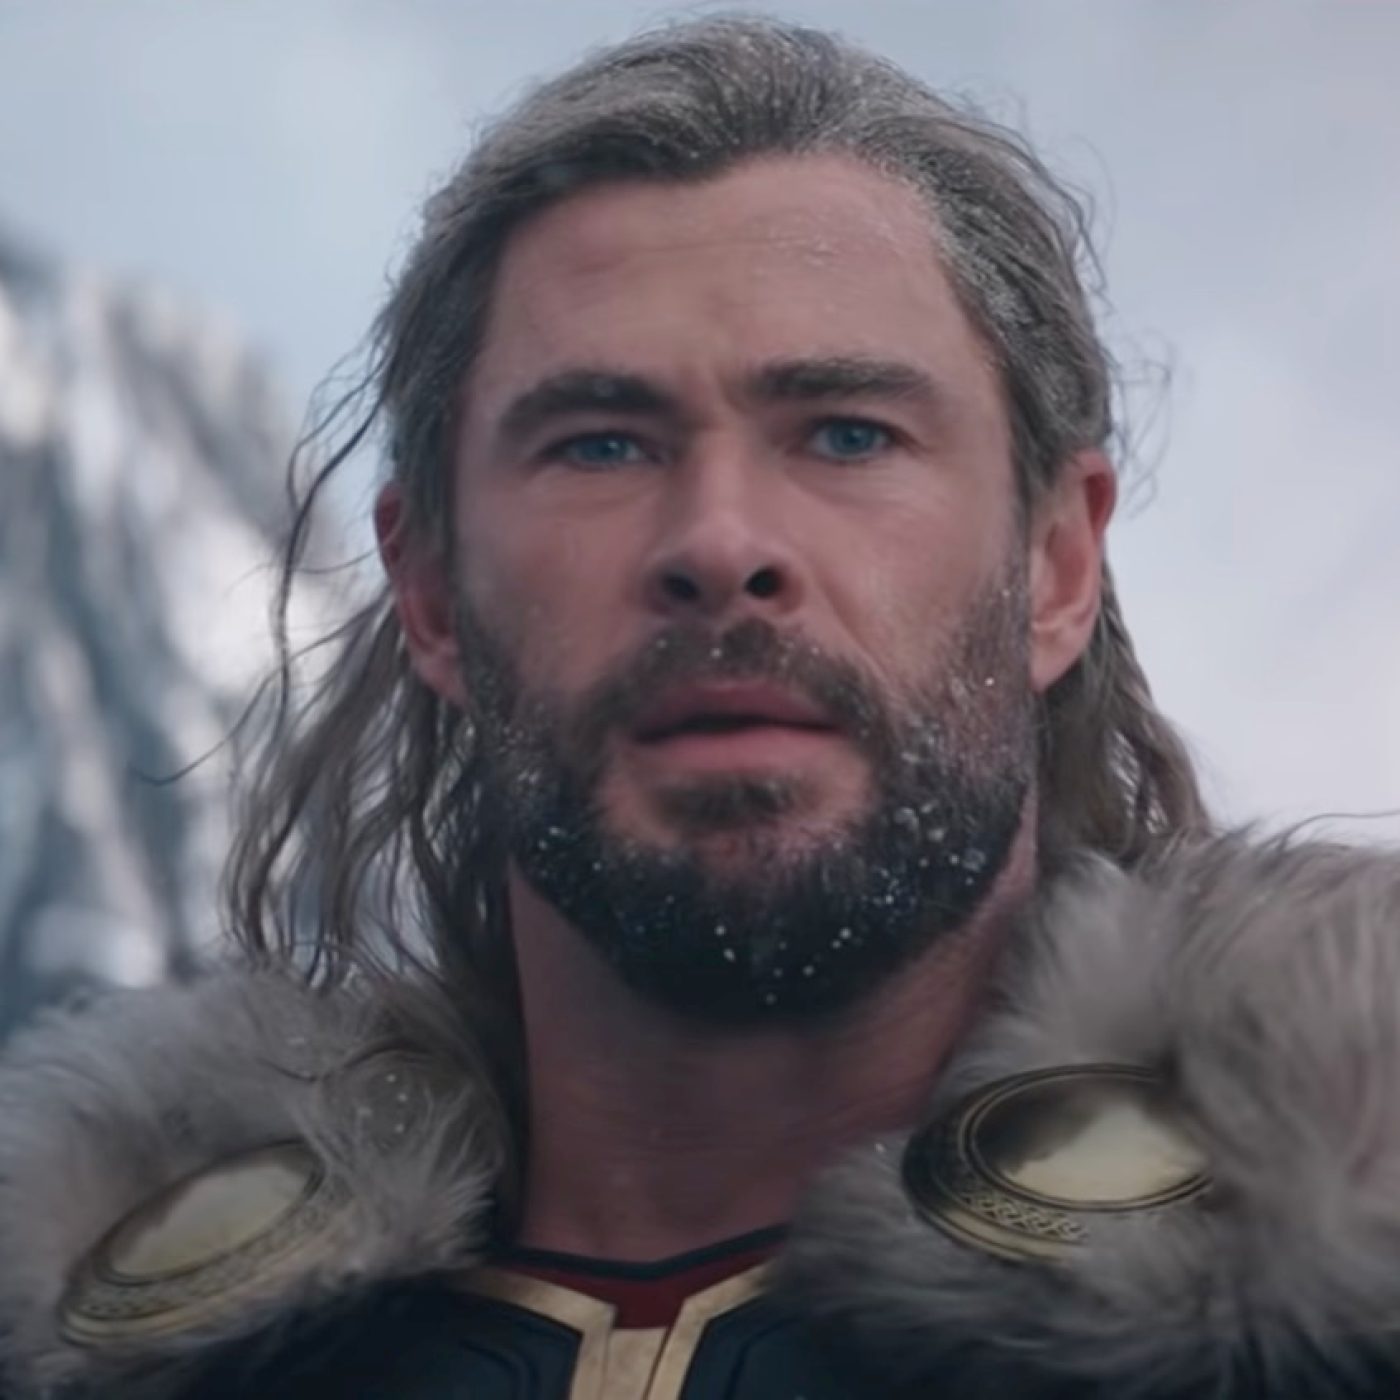 Thor: Love & Thunder Continues Rough MCU Phase 4 Rotten Tomatoes Trend